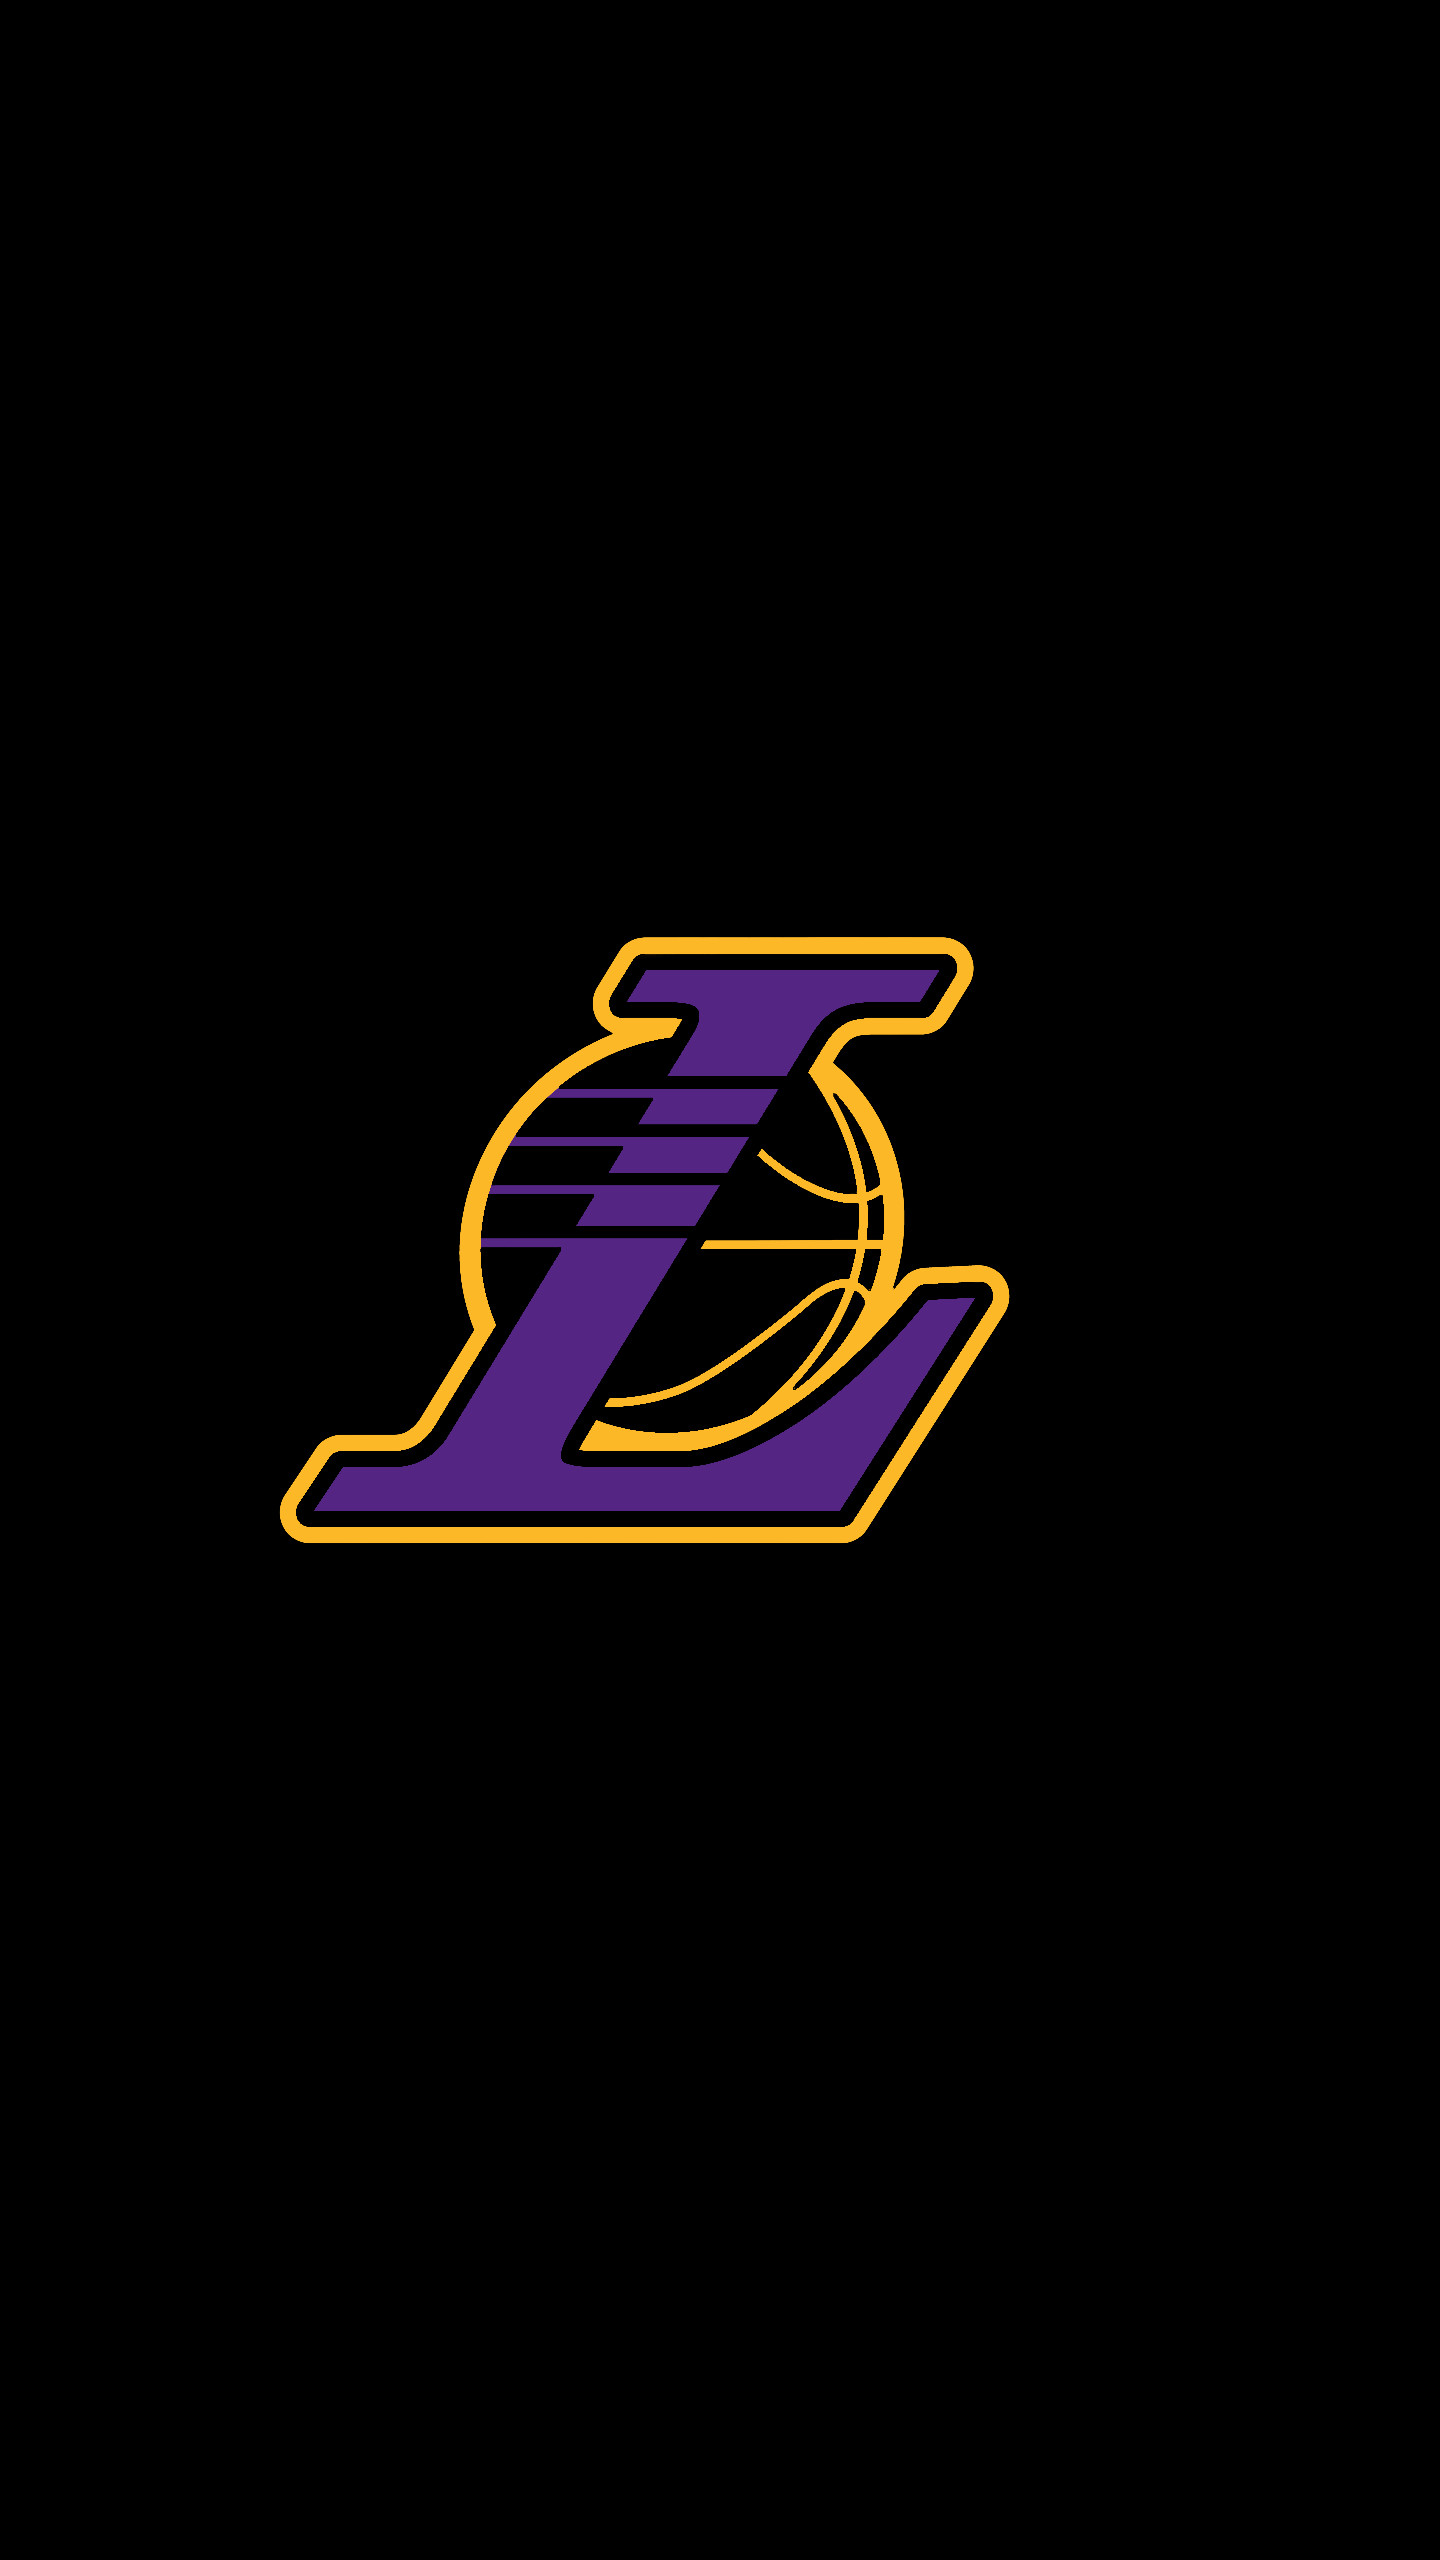 1440x2560 Made my own Lakers minimalist logos phone background () : lakers